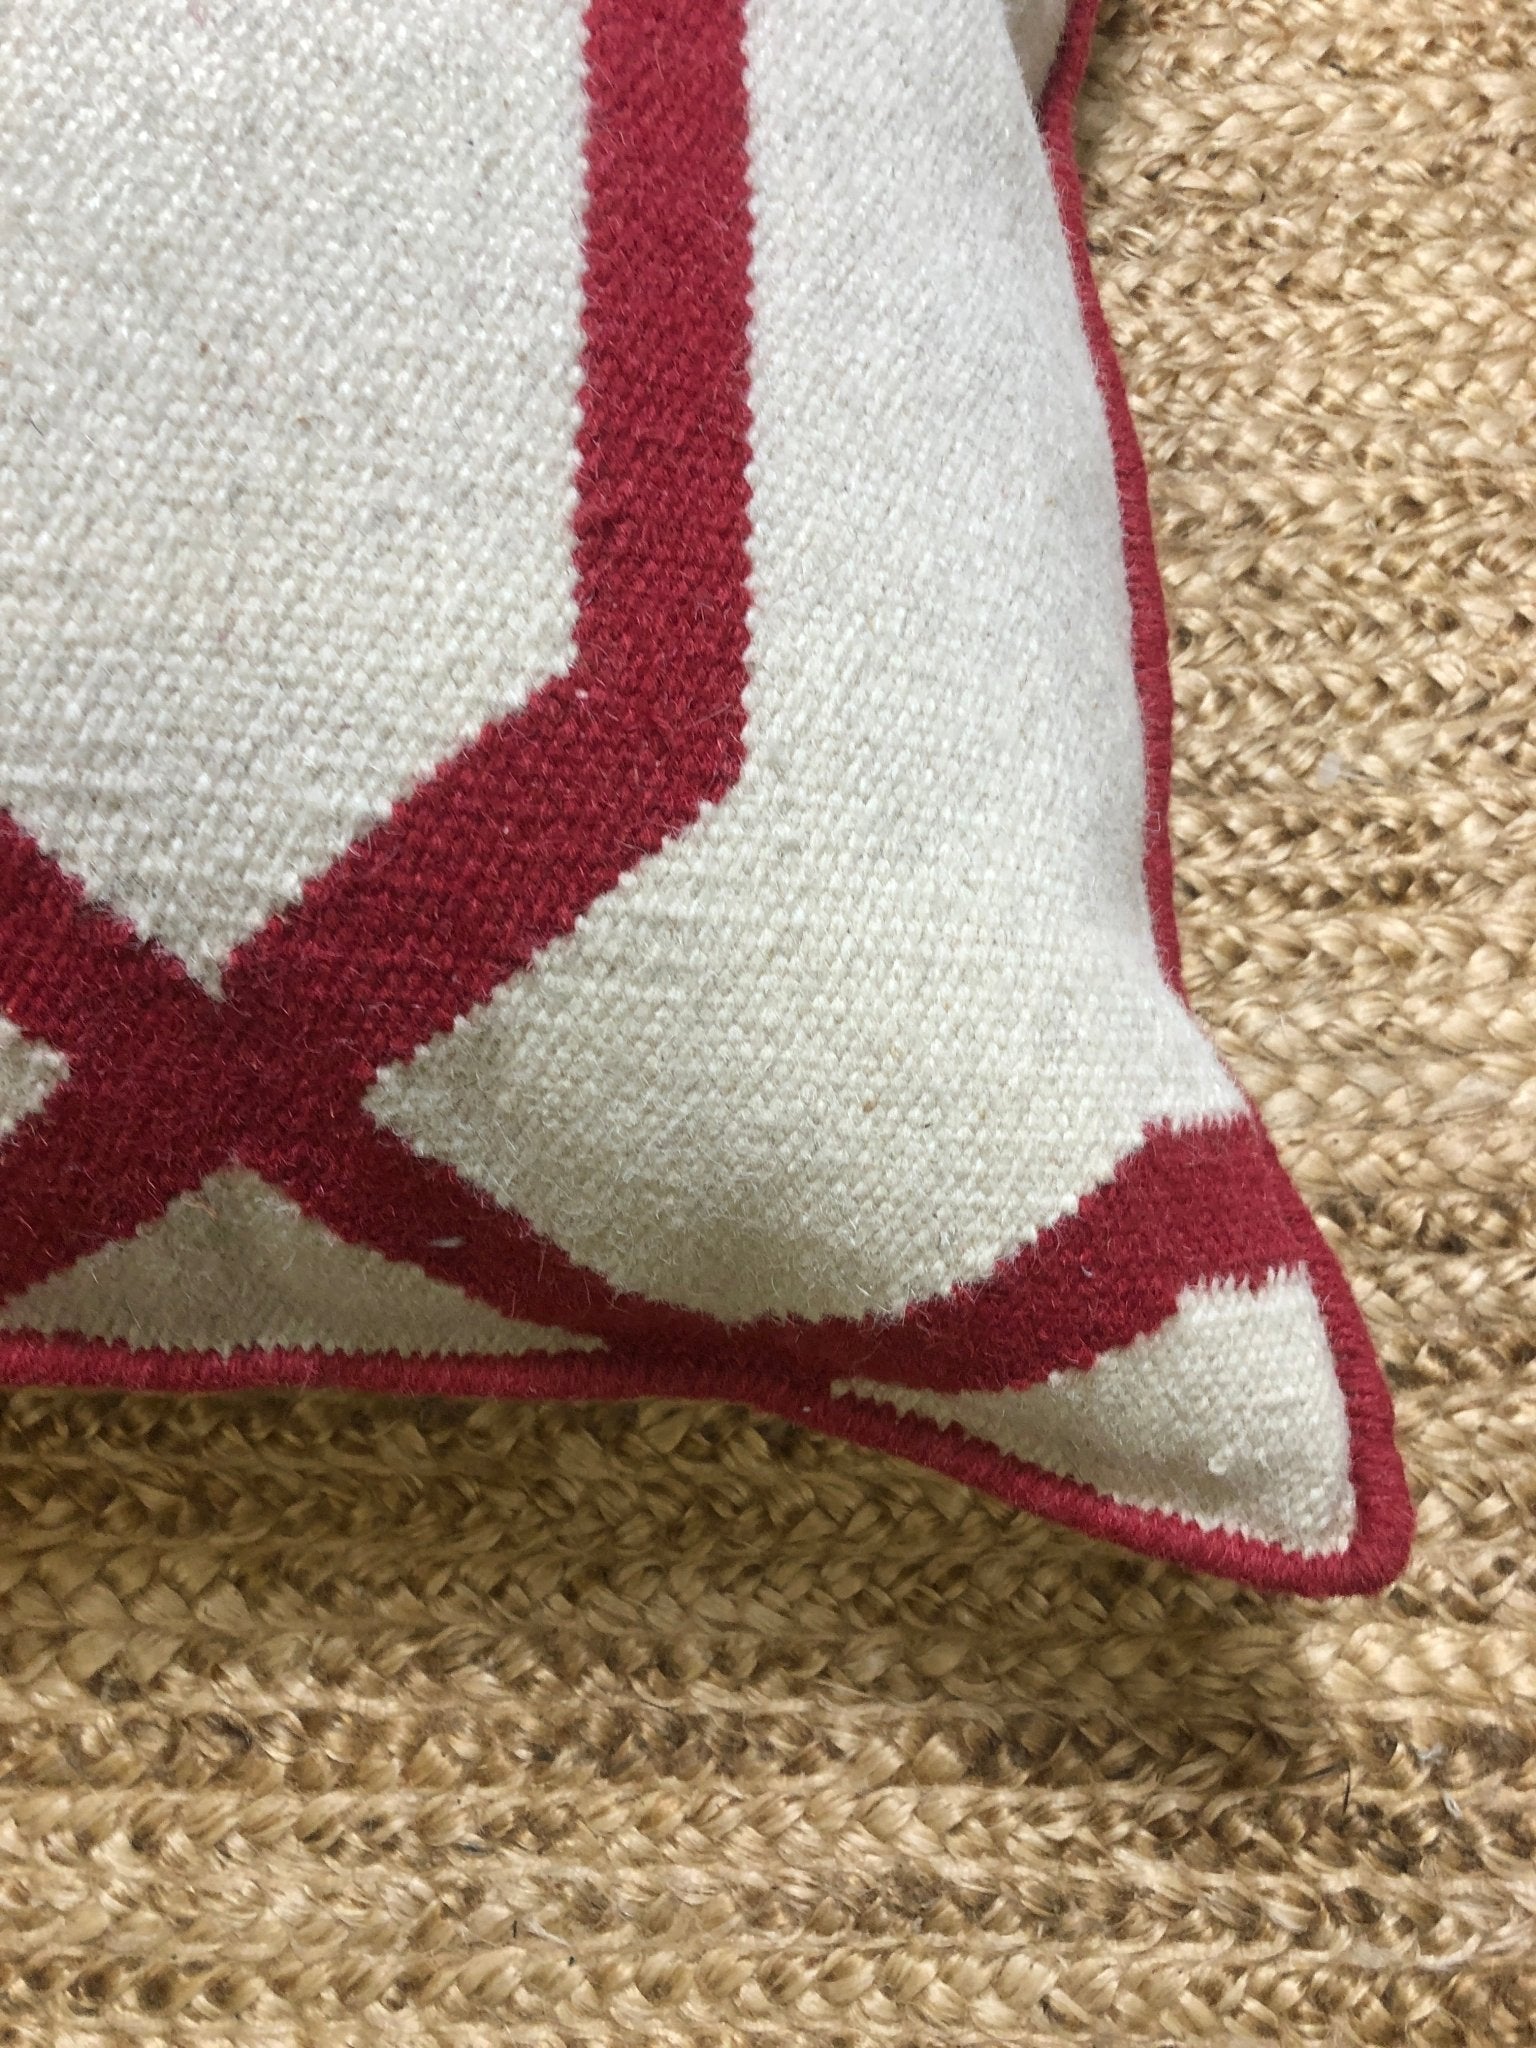 Jessie Spano Large Red and White Abstract Pillow | Banana Manor Rug Company